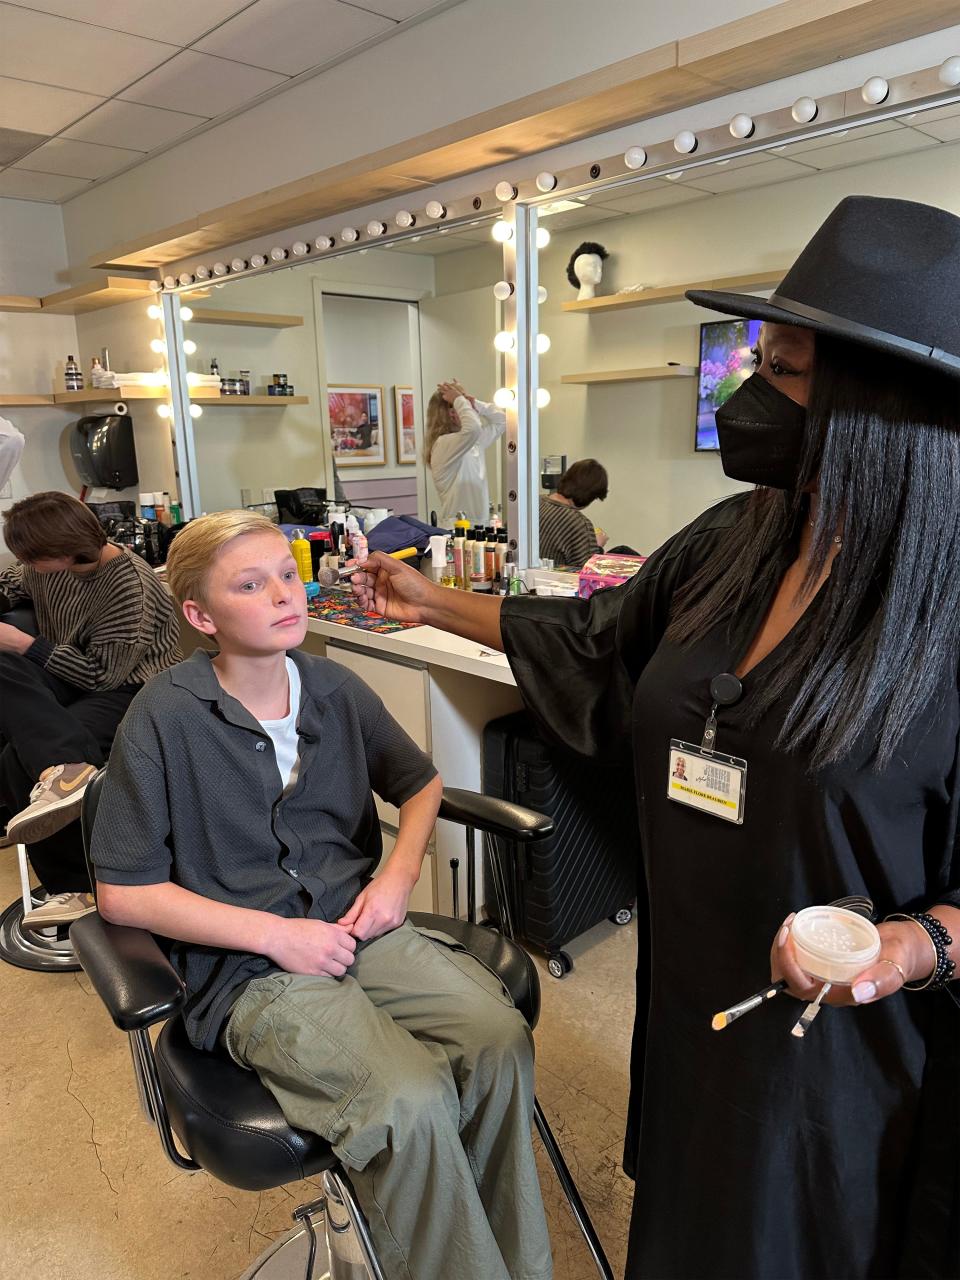 Reid Wilson, 14, of Montgomery gets his makeup done before an appearance on "The Jennifer Hudson Show."